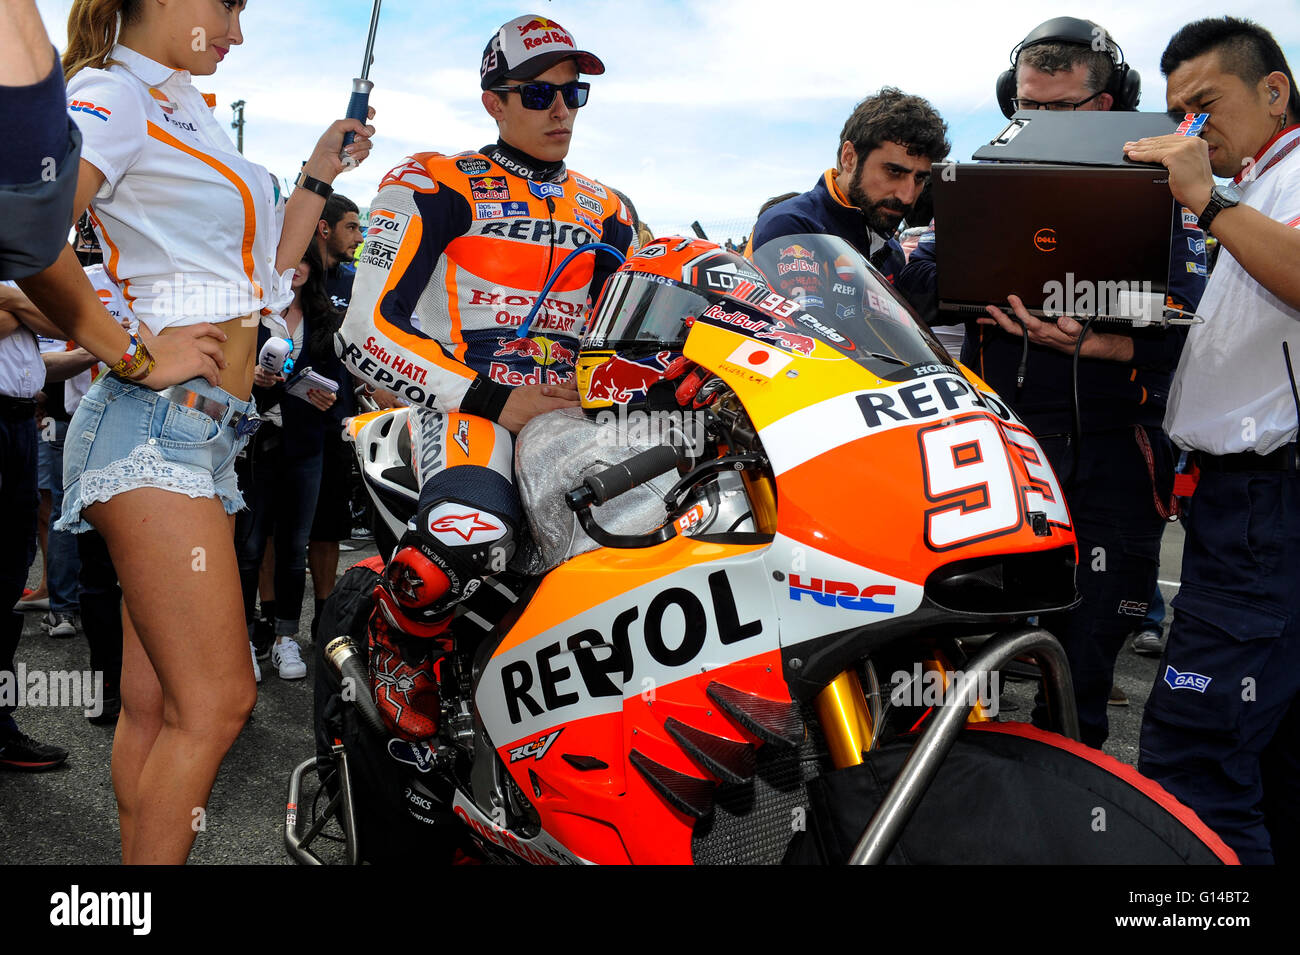 Le mans, France. 08th May, 2016. Marc Marquez (Repsol Honda) during on  MotoGP race day. Marc Márquez Alentà is a Spanish Grand Prix motorcycle  road racer and two-time MotoGP world champion. He